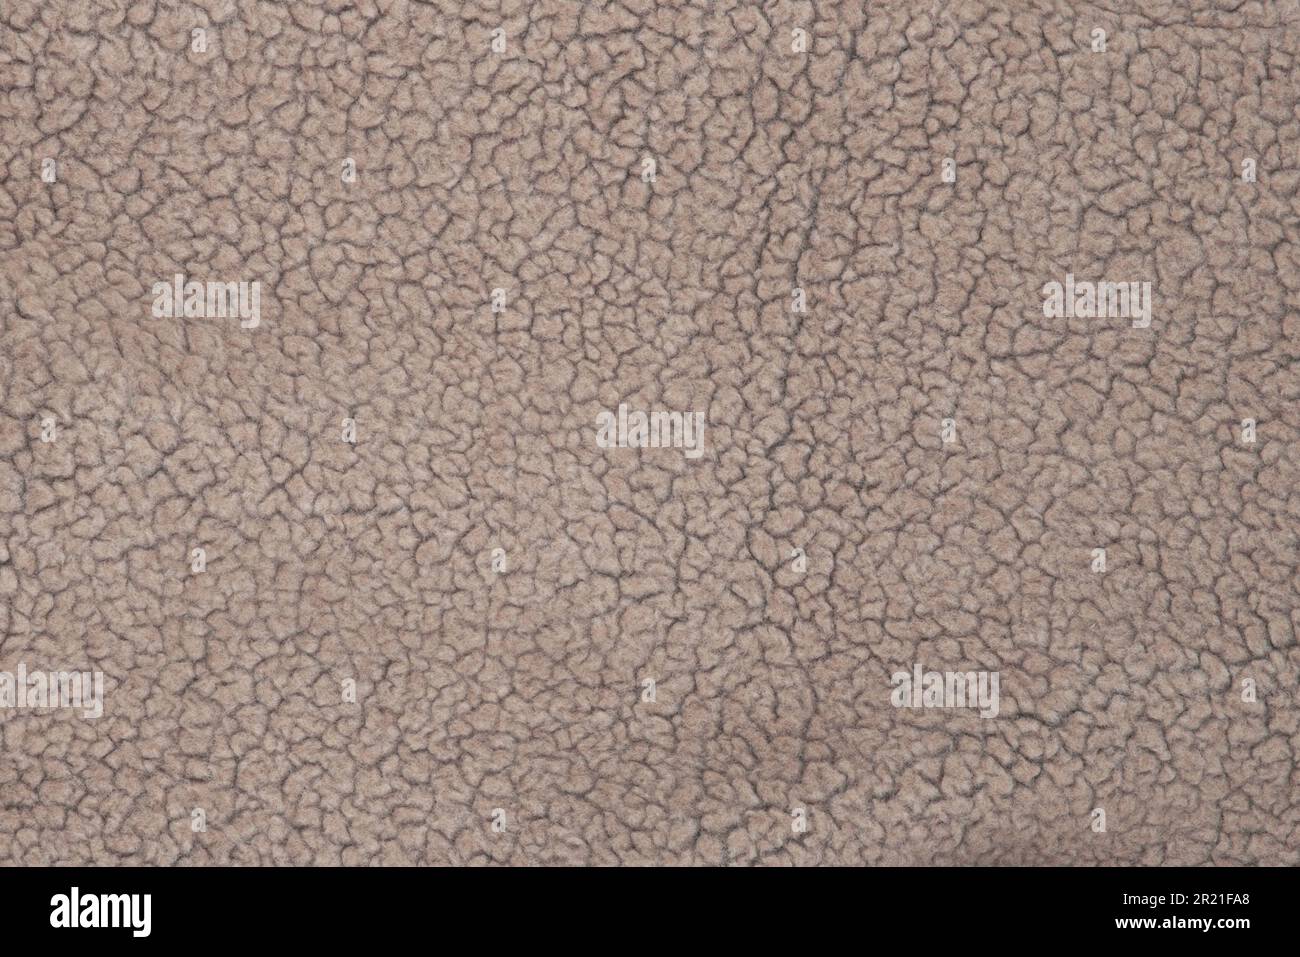 Wool texture. Beige wool background, natural sheepskin close-up. Top view Stock Photo